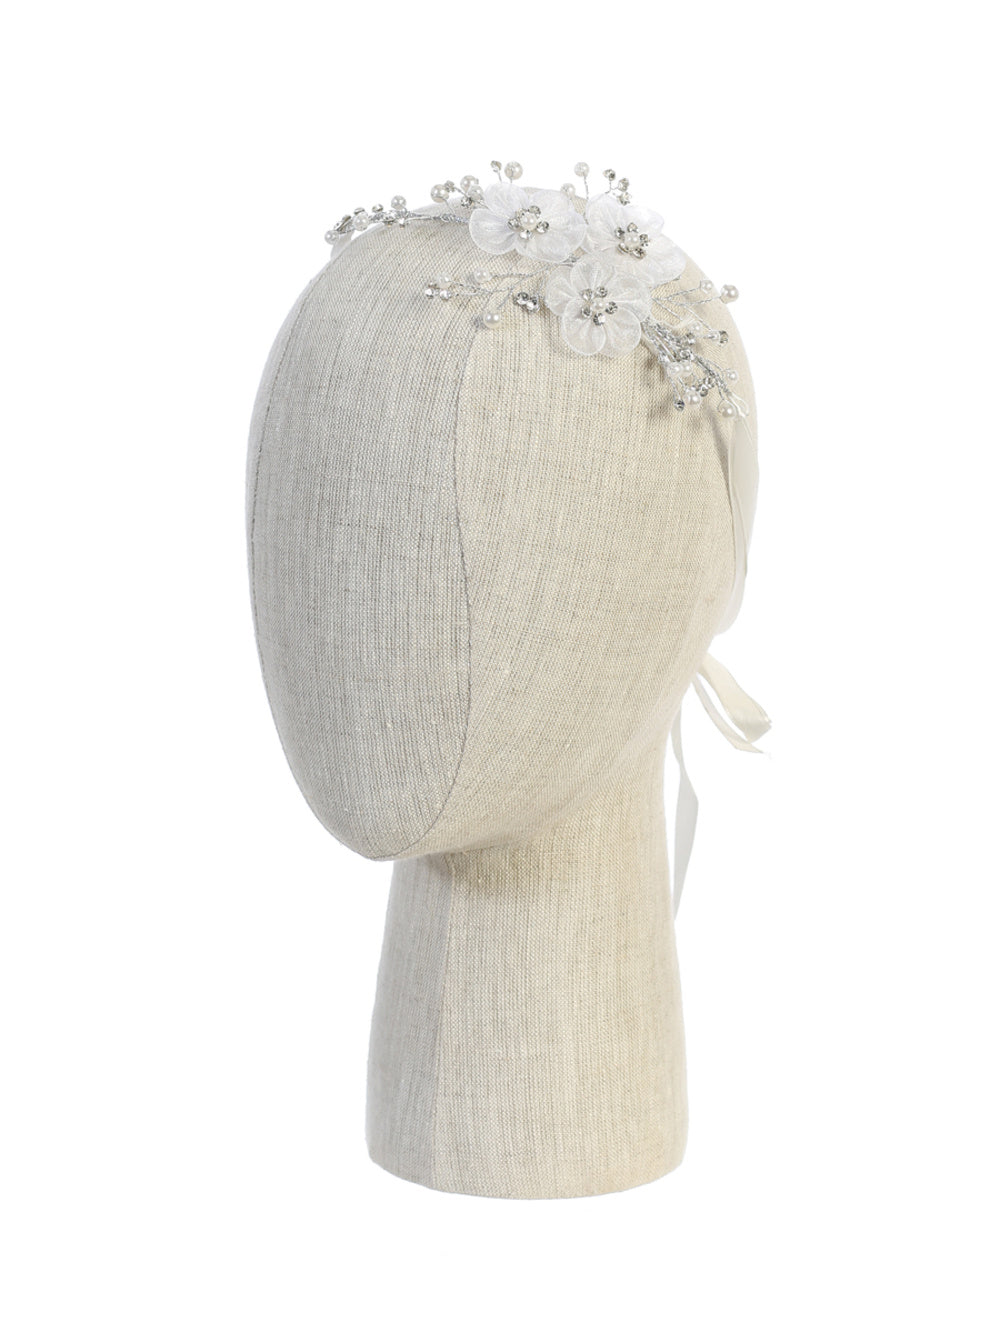 Hairpiece with Organza Flowers with Rhinestones